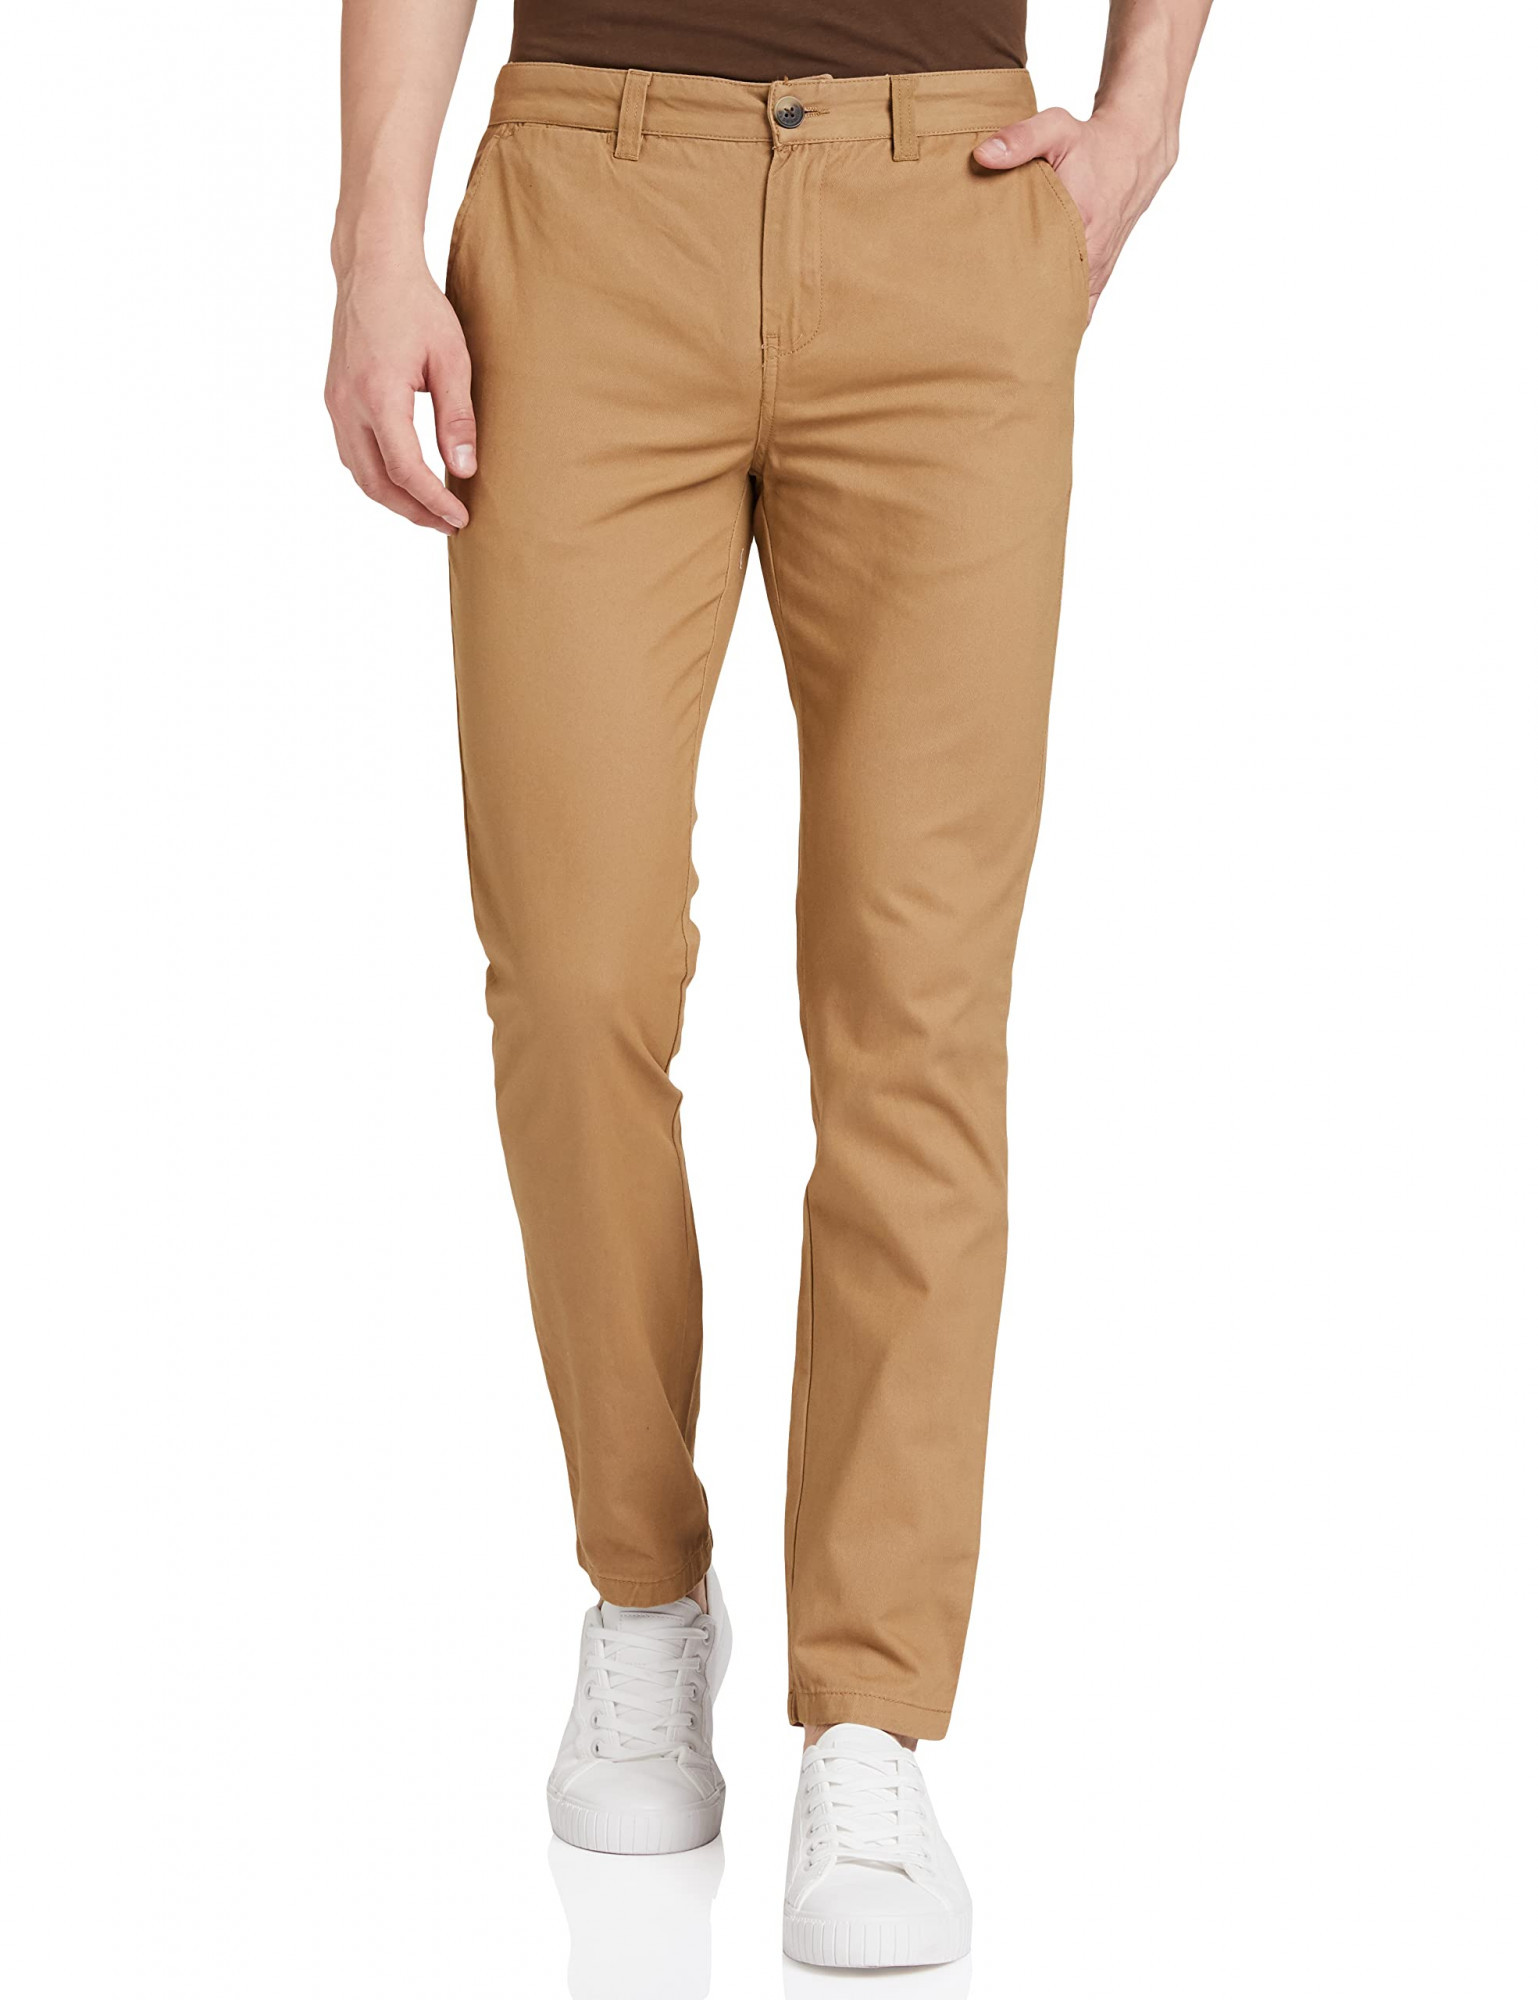 Solid BRANDED Men Cotton Cargo Trouser, Slim Fit at Rs 550 in Hyderabad